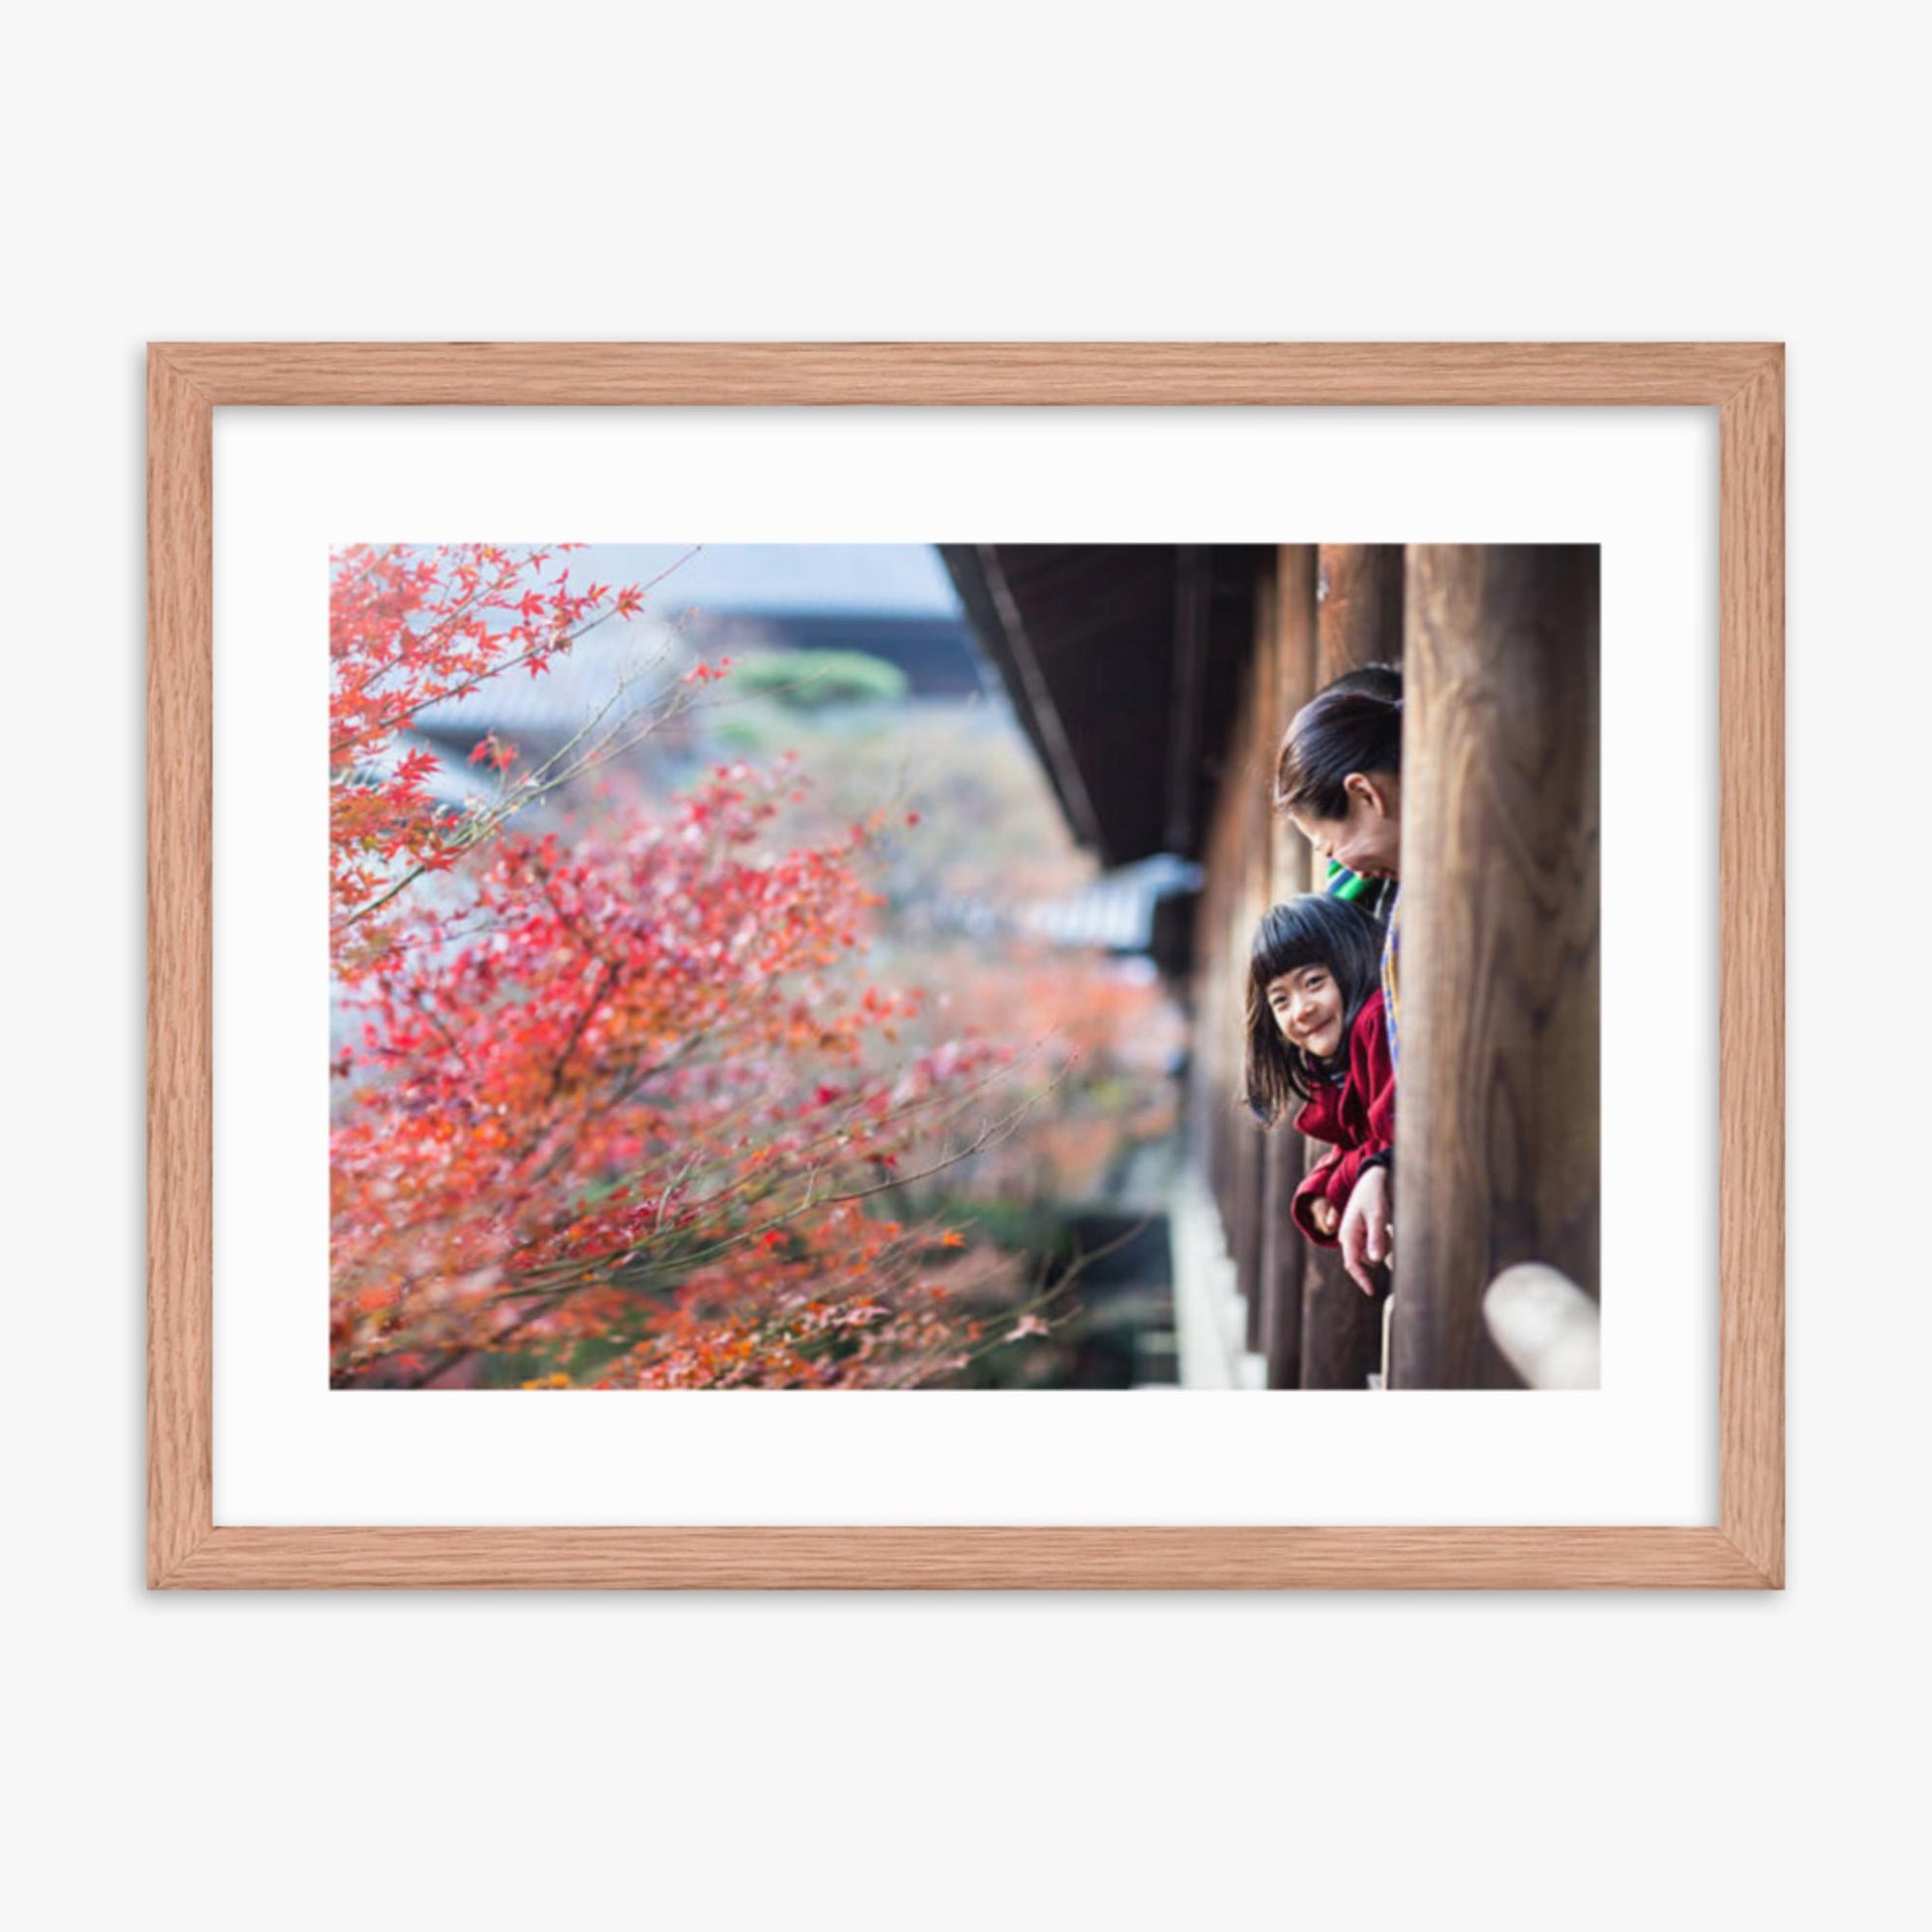 Father, mother and daughter at a temple enjoying autumn leaves 18x24 in Poster With Oak Frame